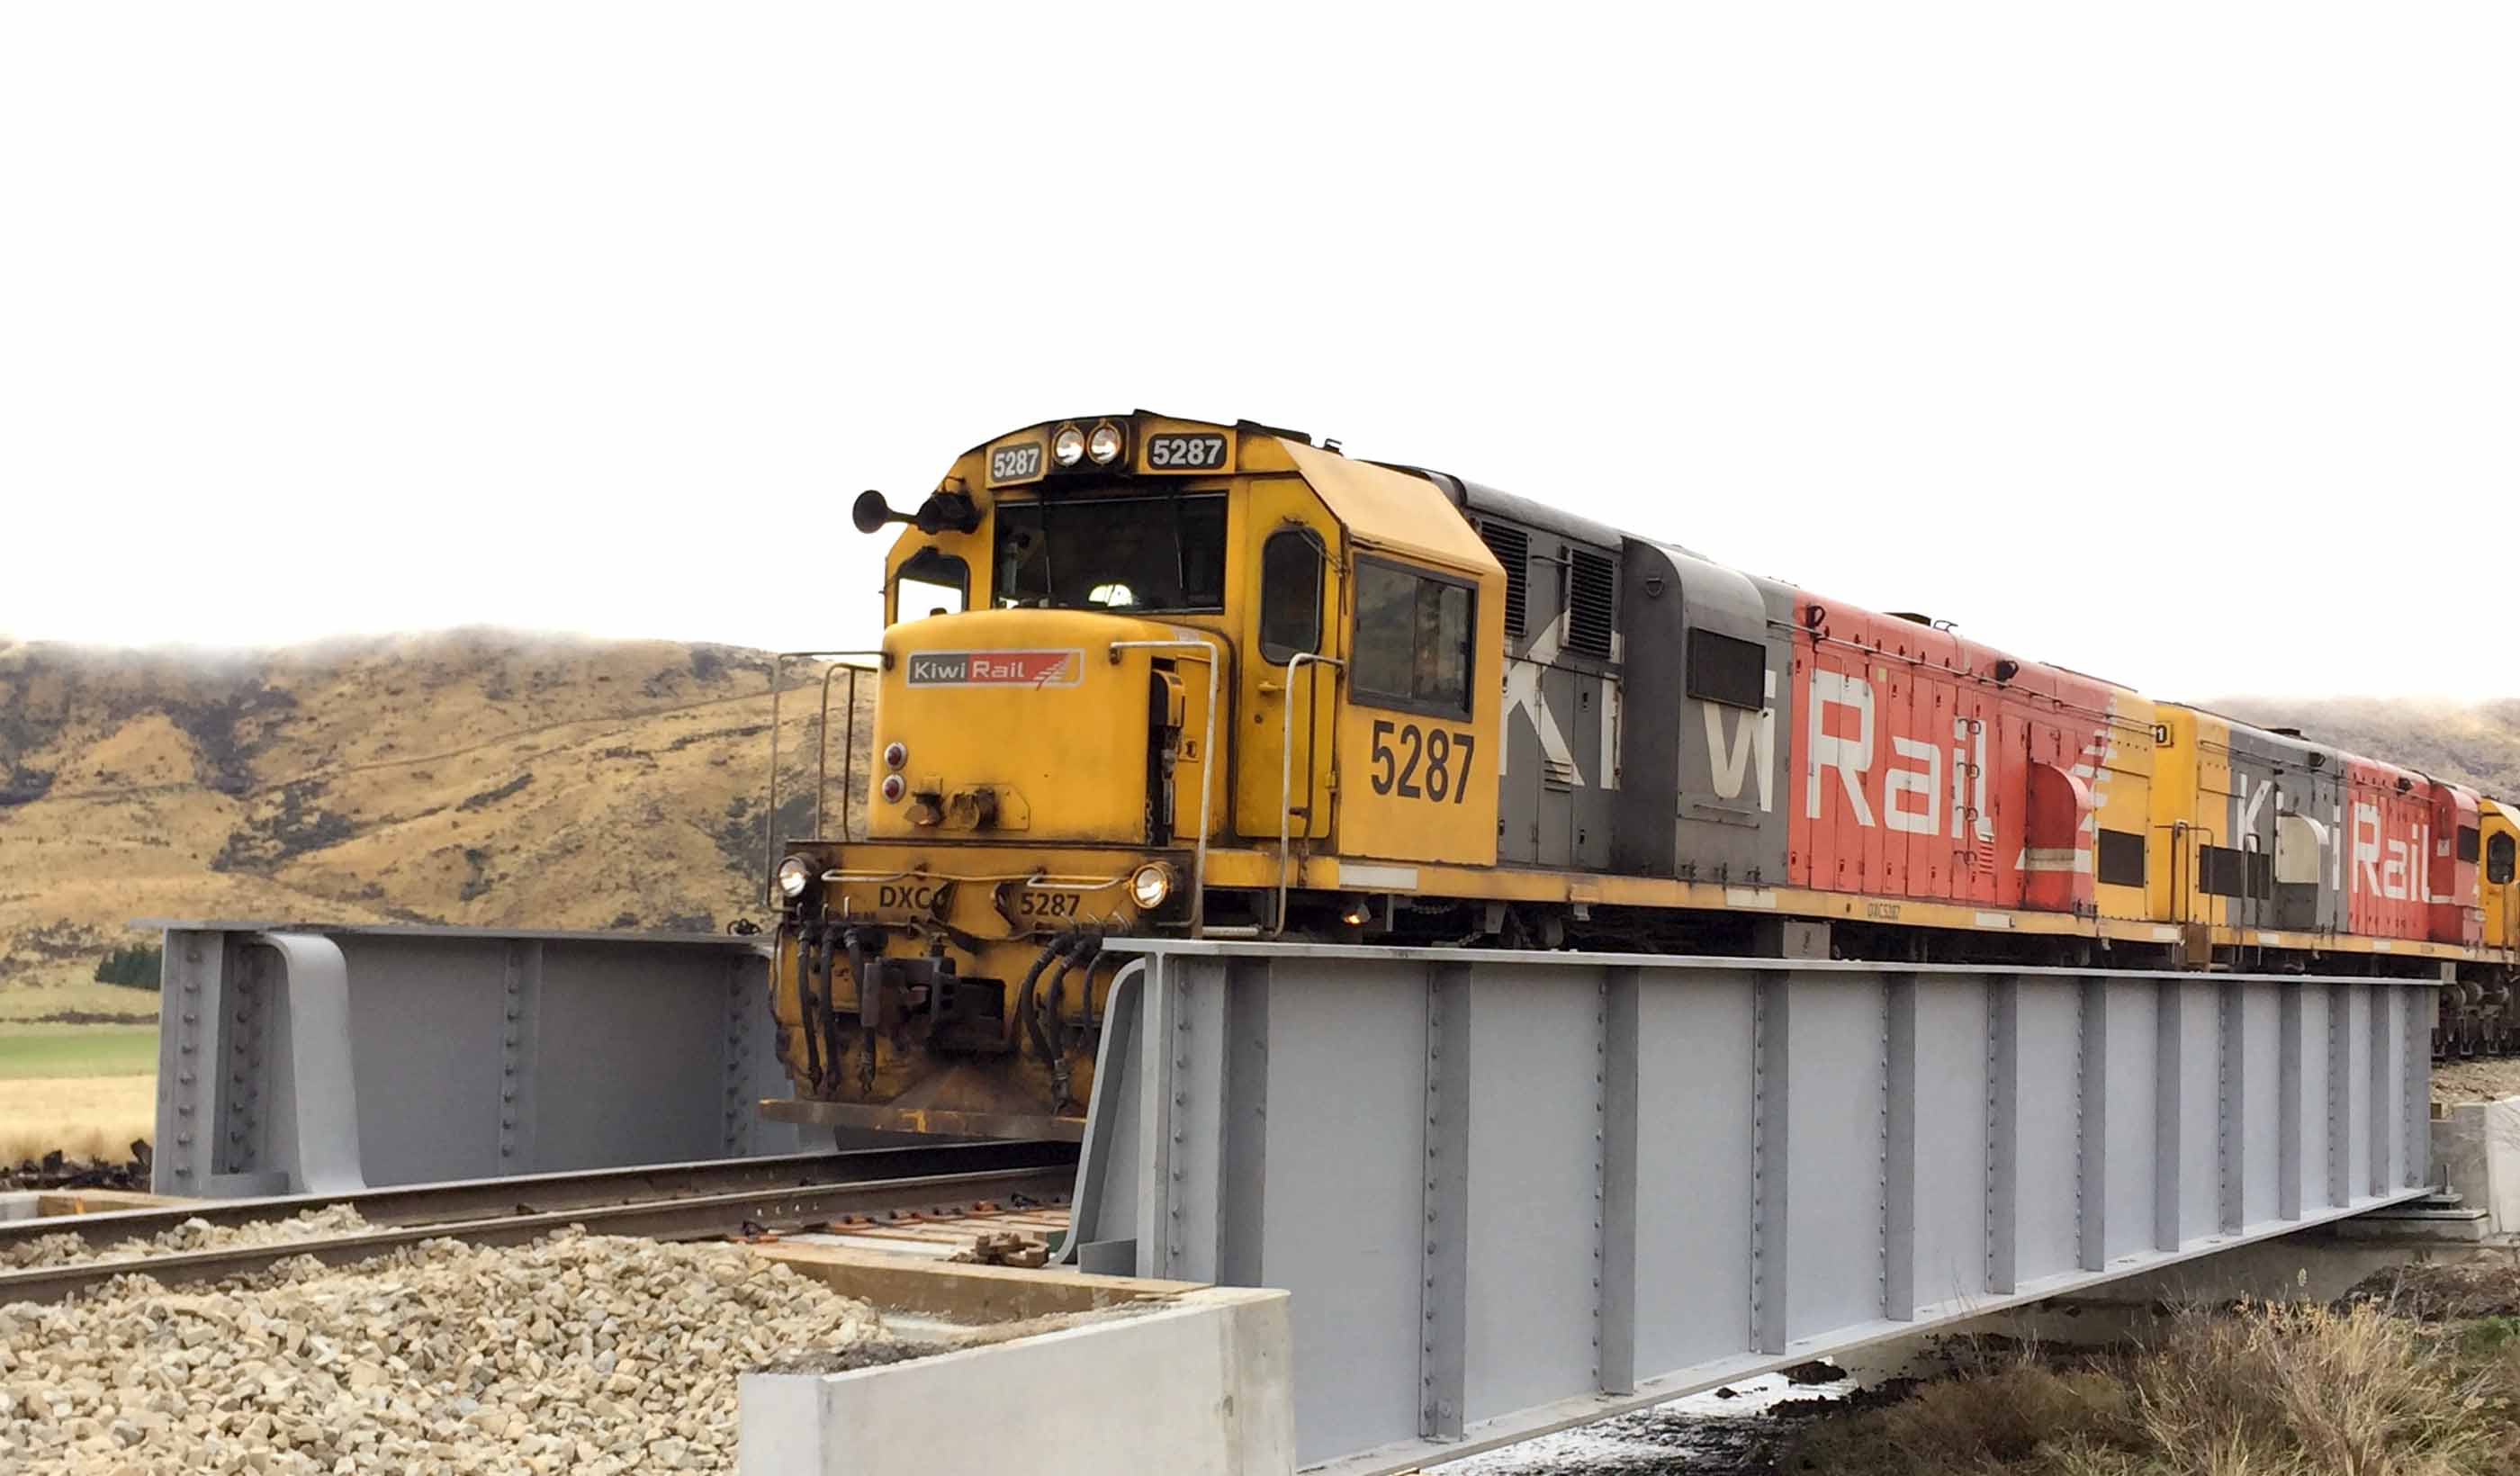 Published in Logistics & Transport NZ: Using rail to take pressure off roads